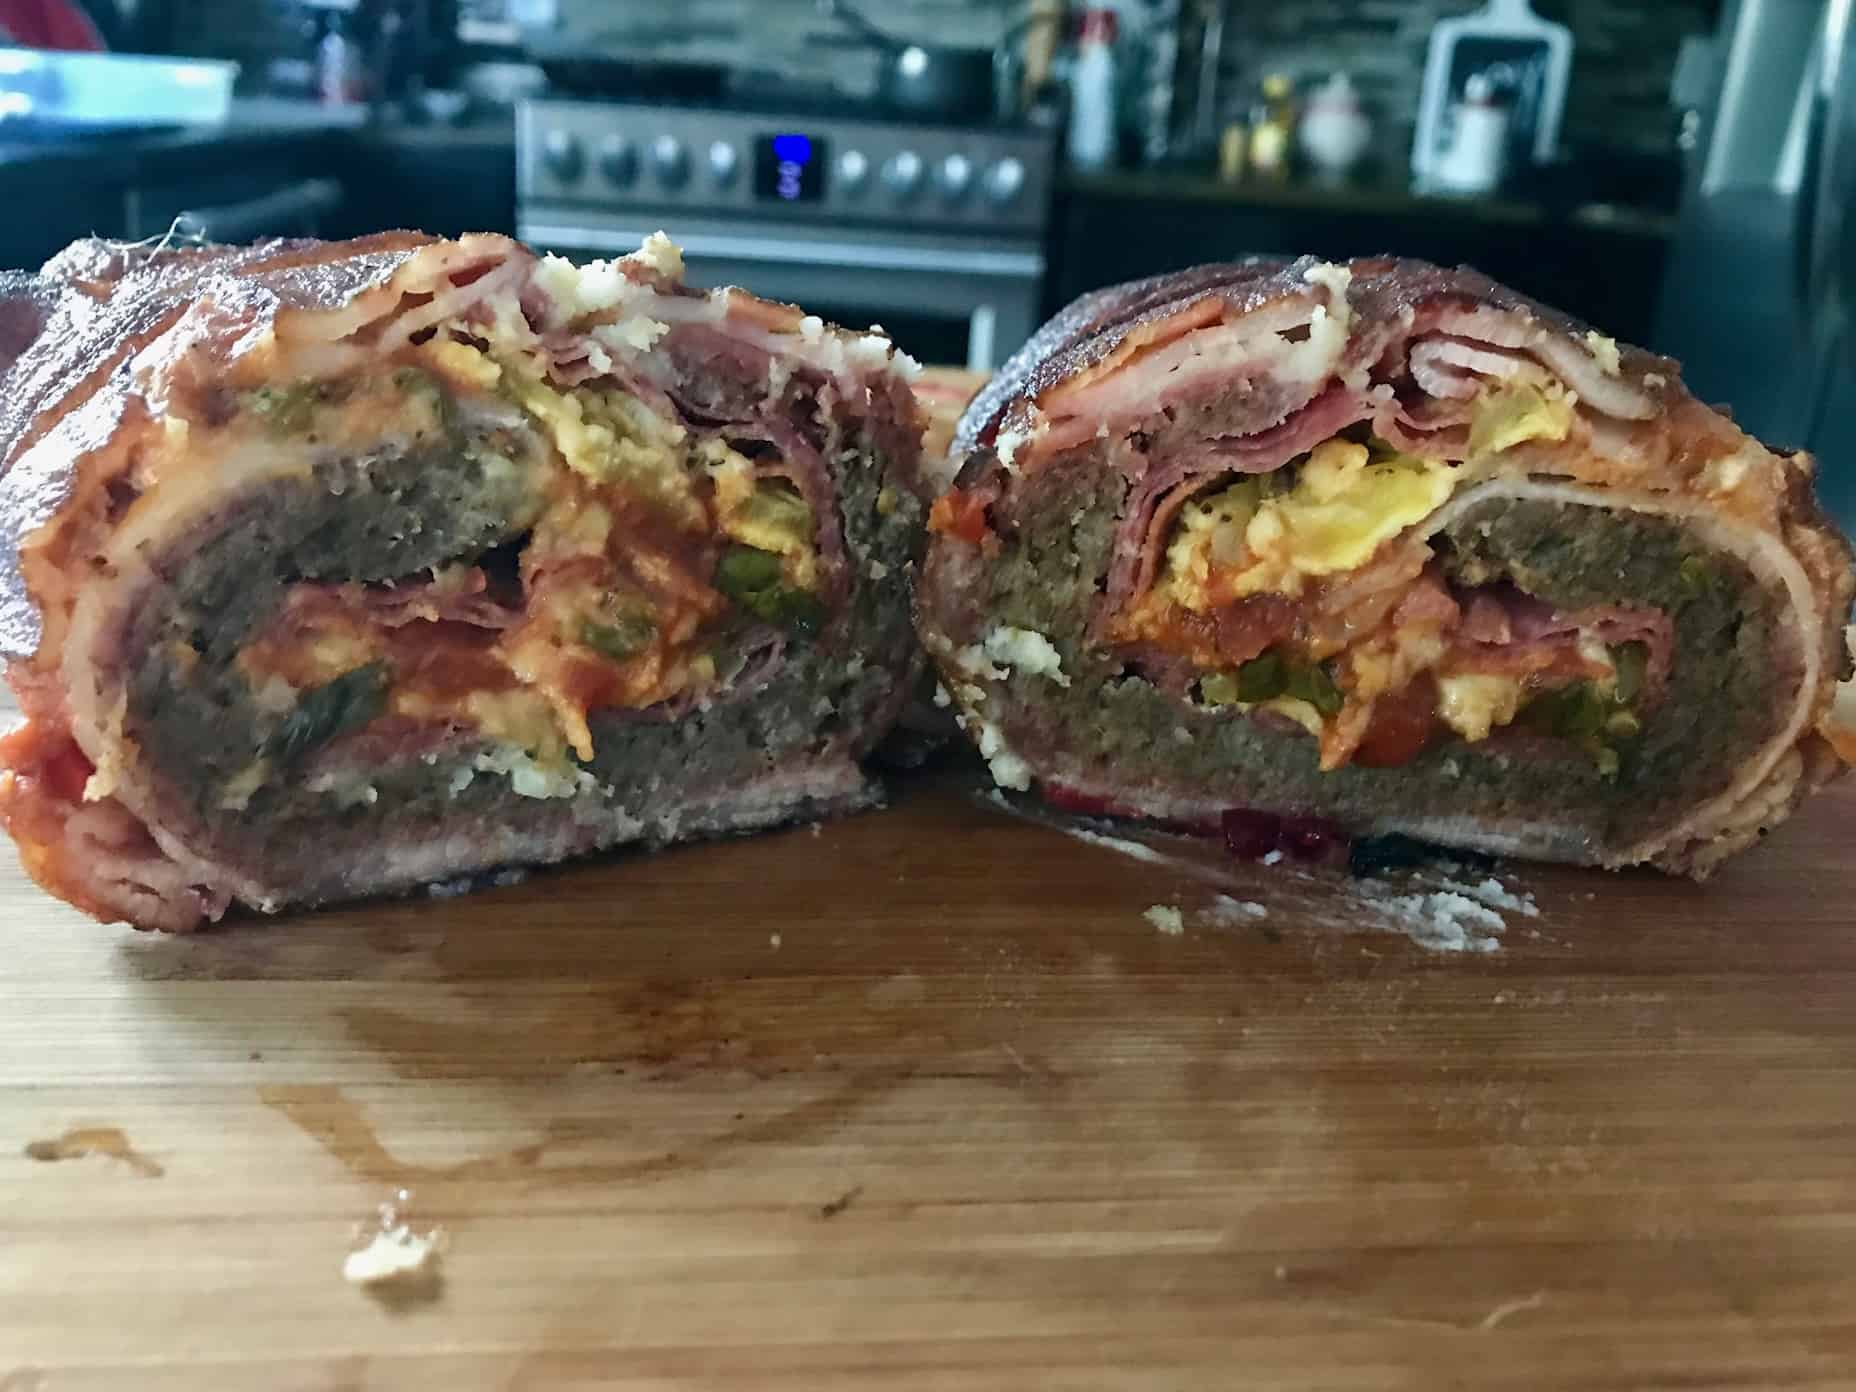 Pizza Bacon Explosion sliced in half to see pizza ingredients in side close up view